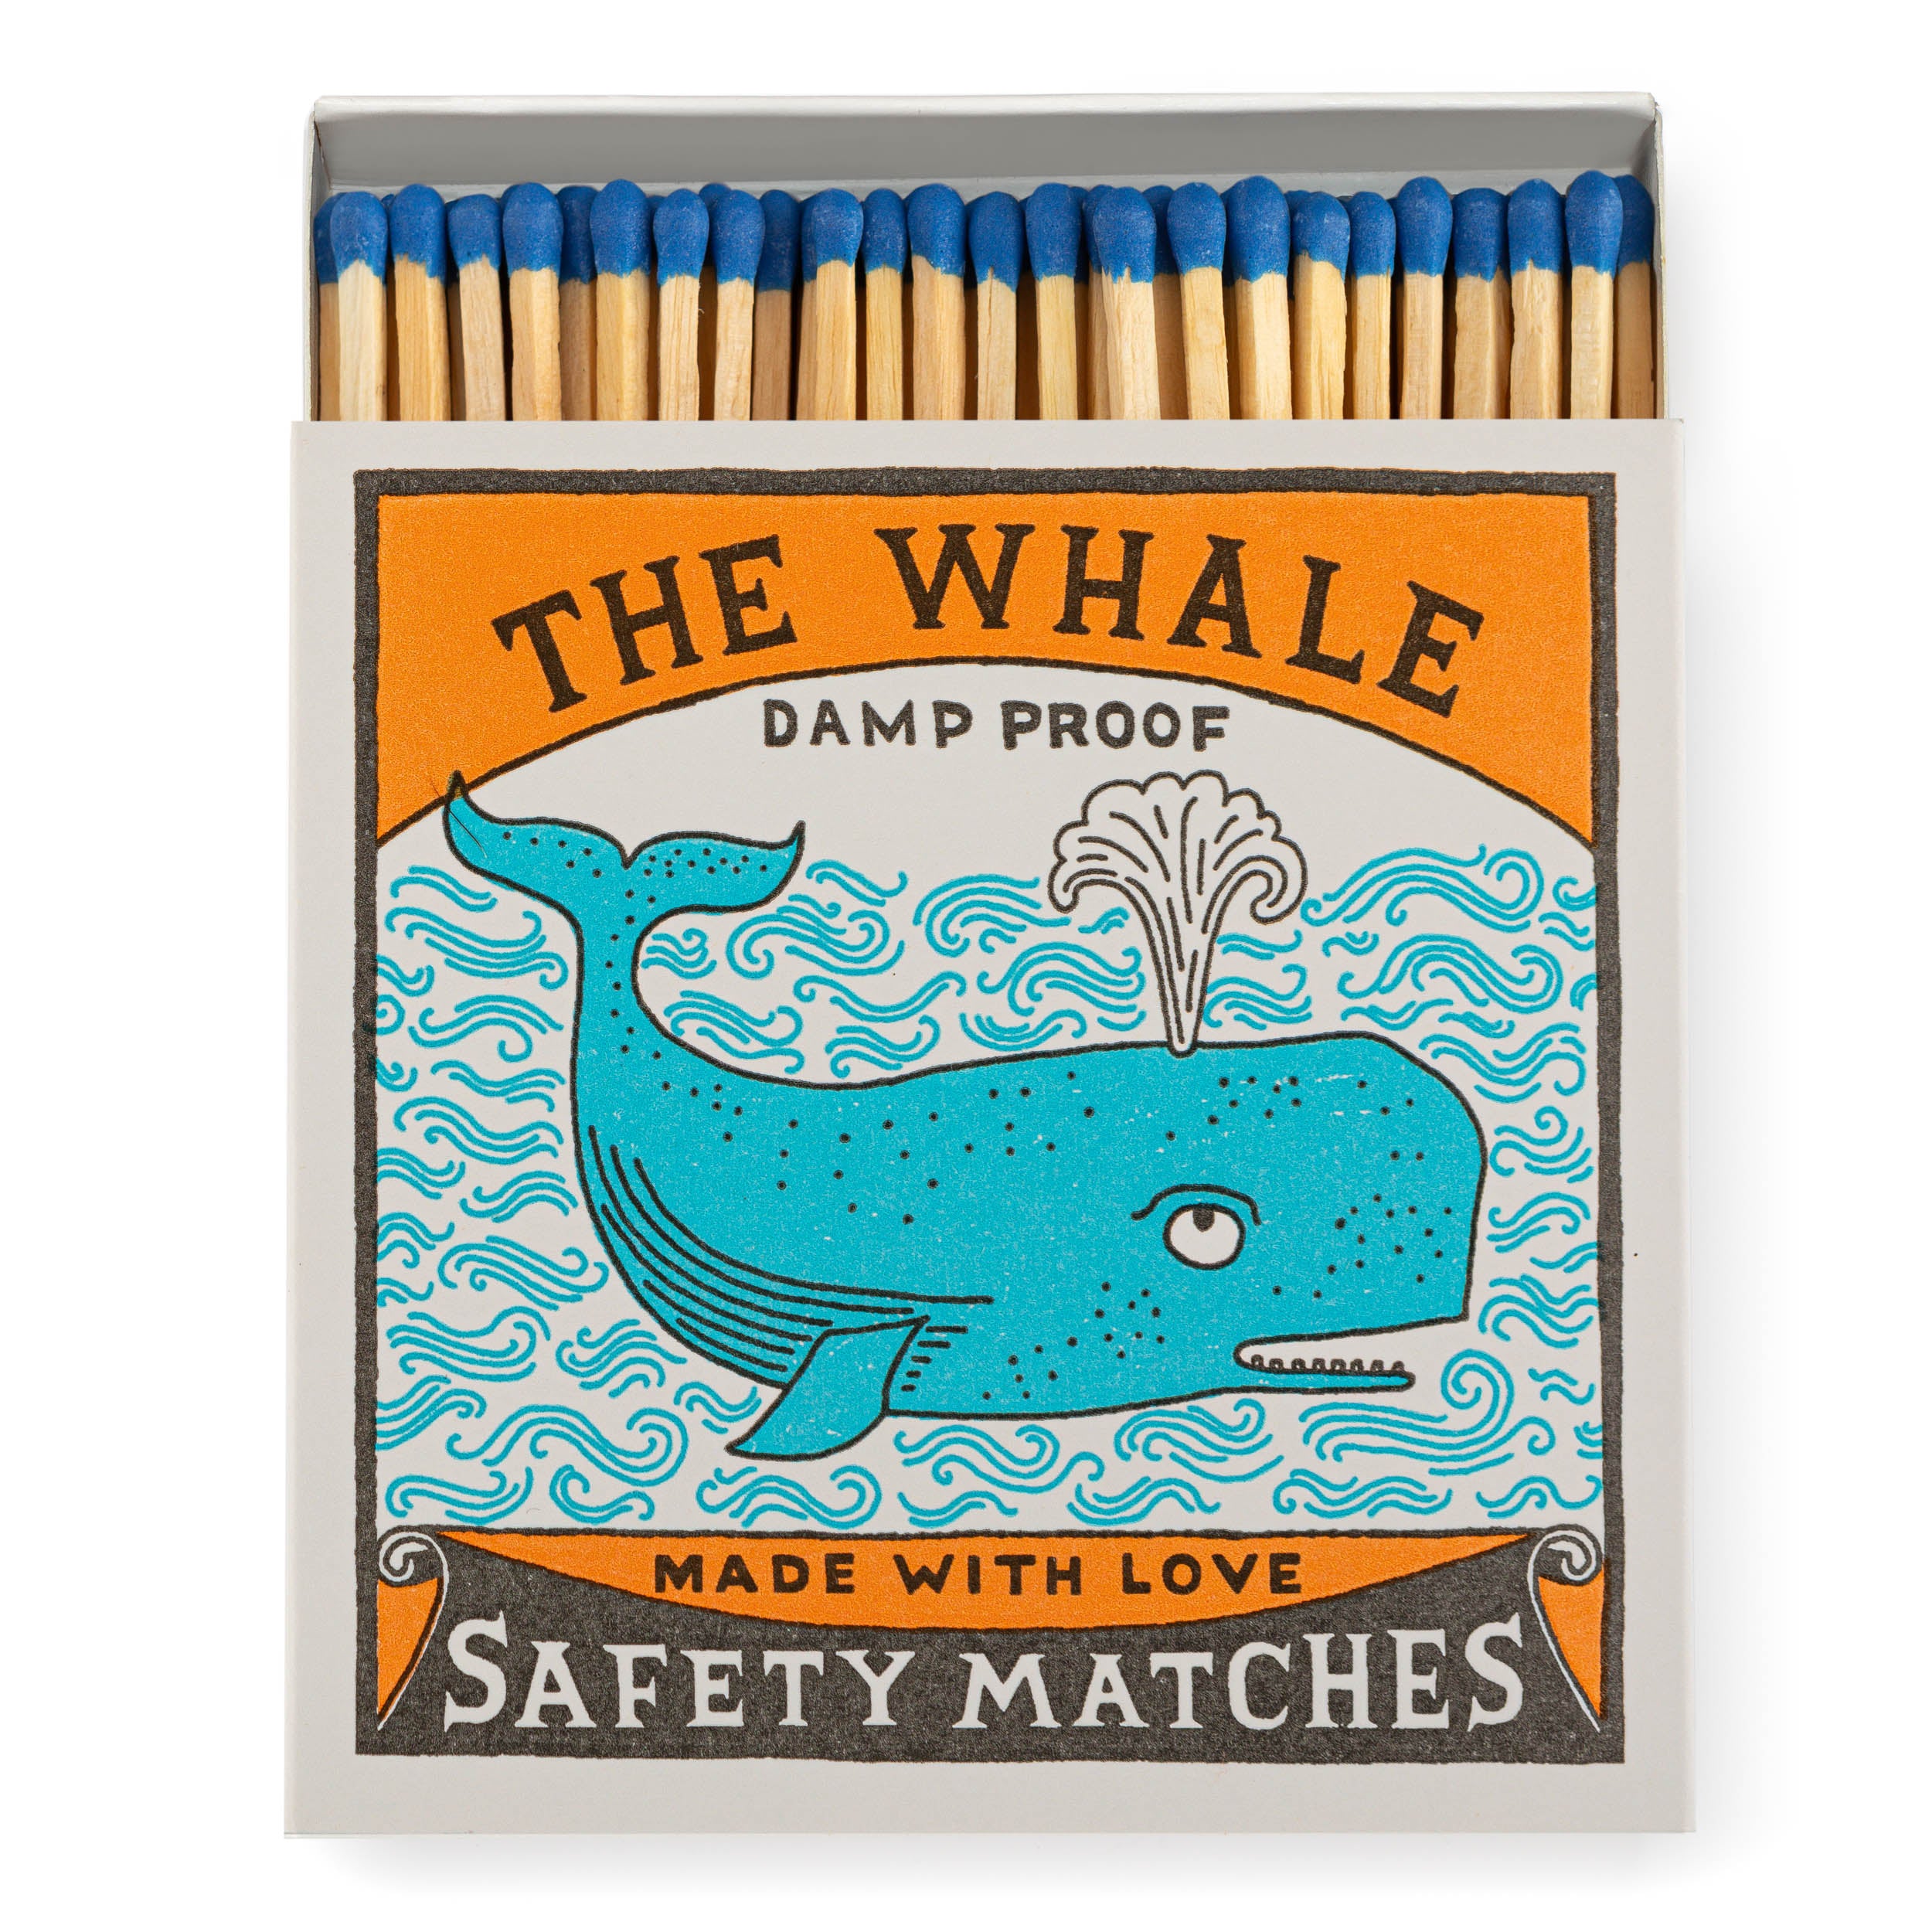 Long Matches - Square Box | The Whale | by Archivist - Lifestory